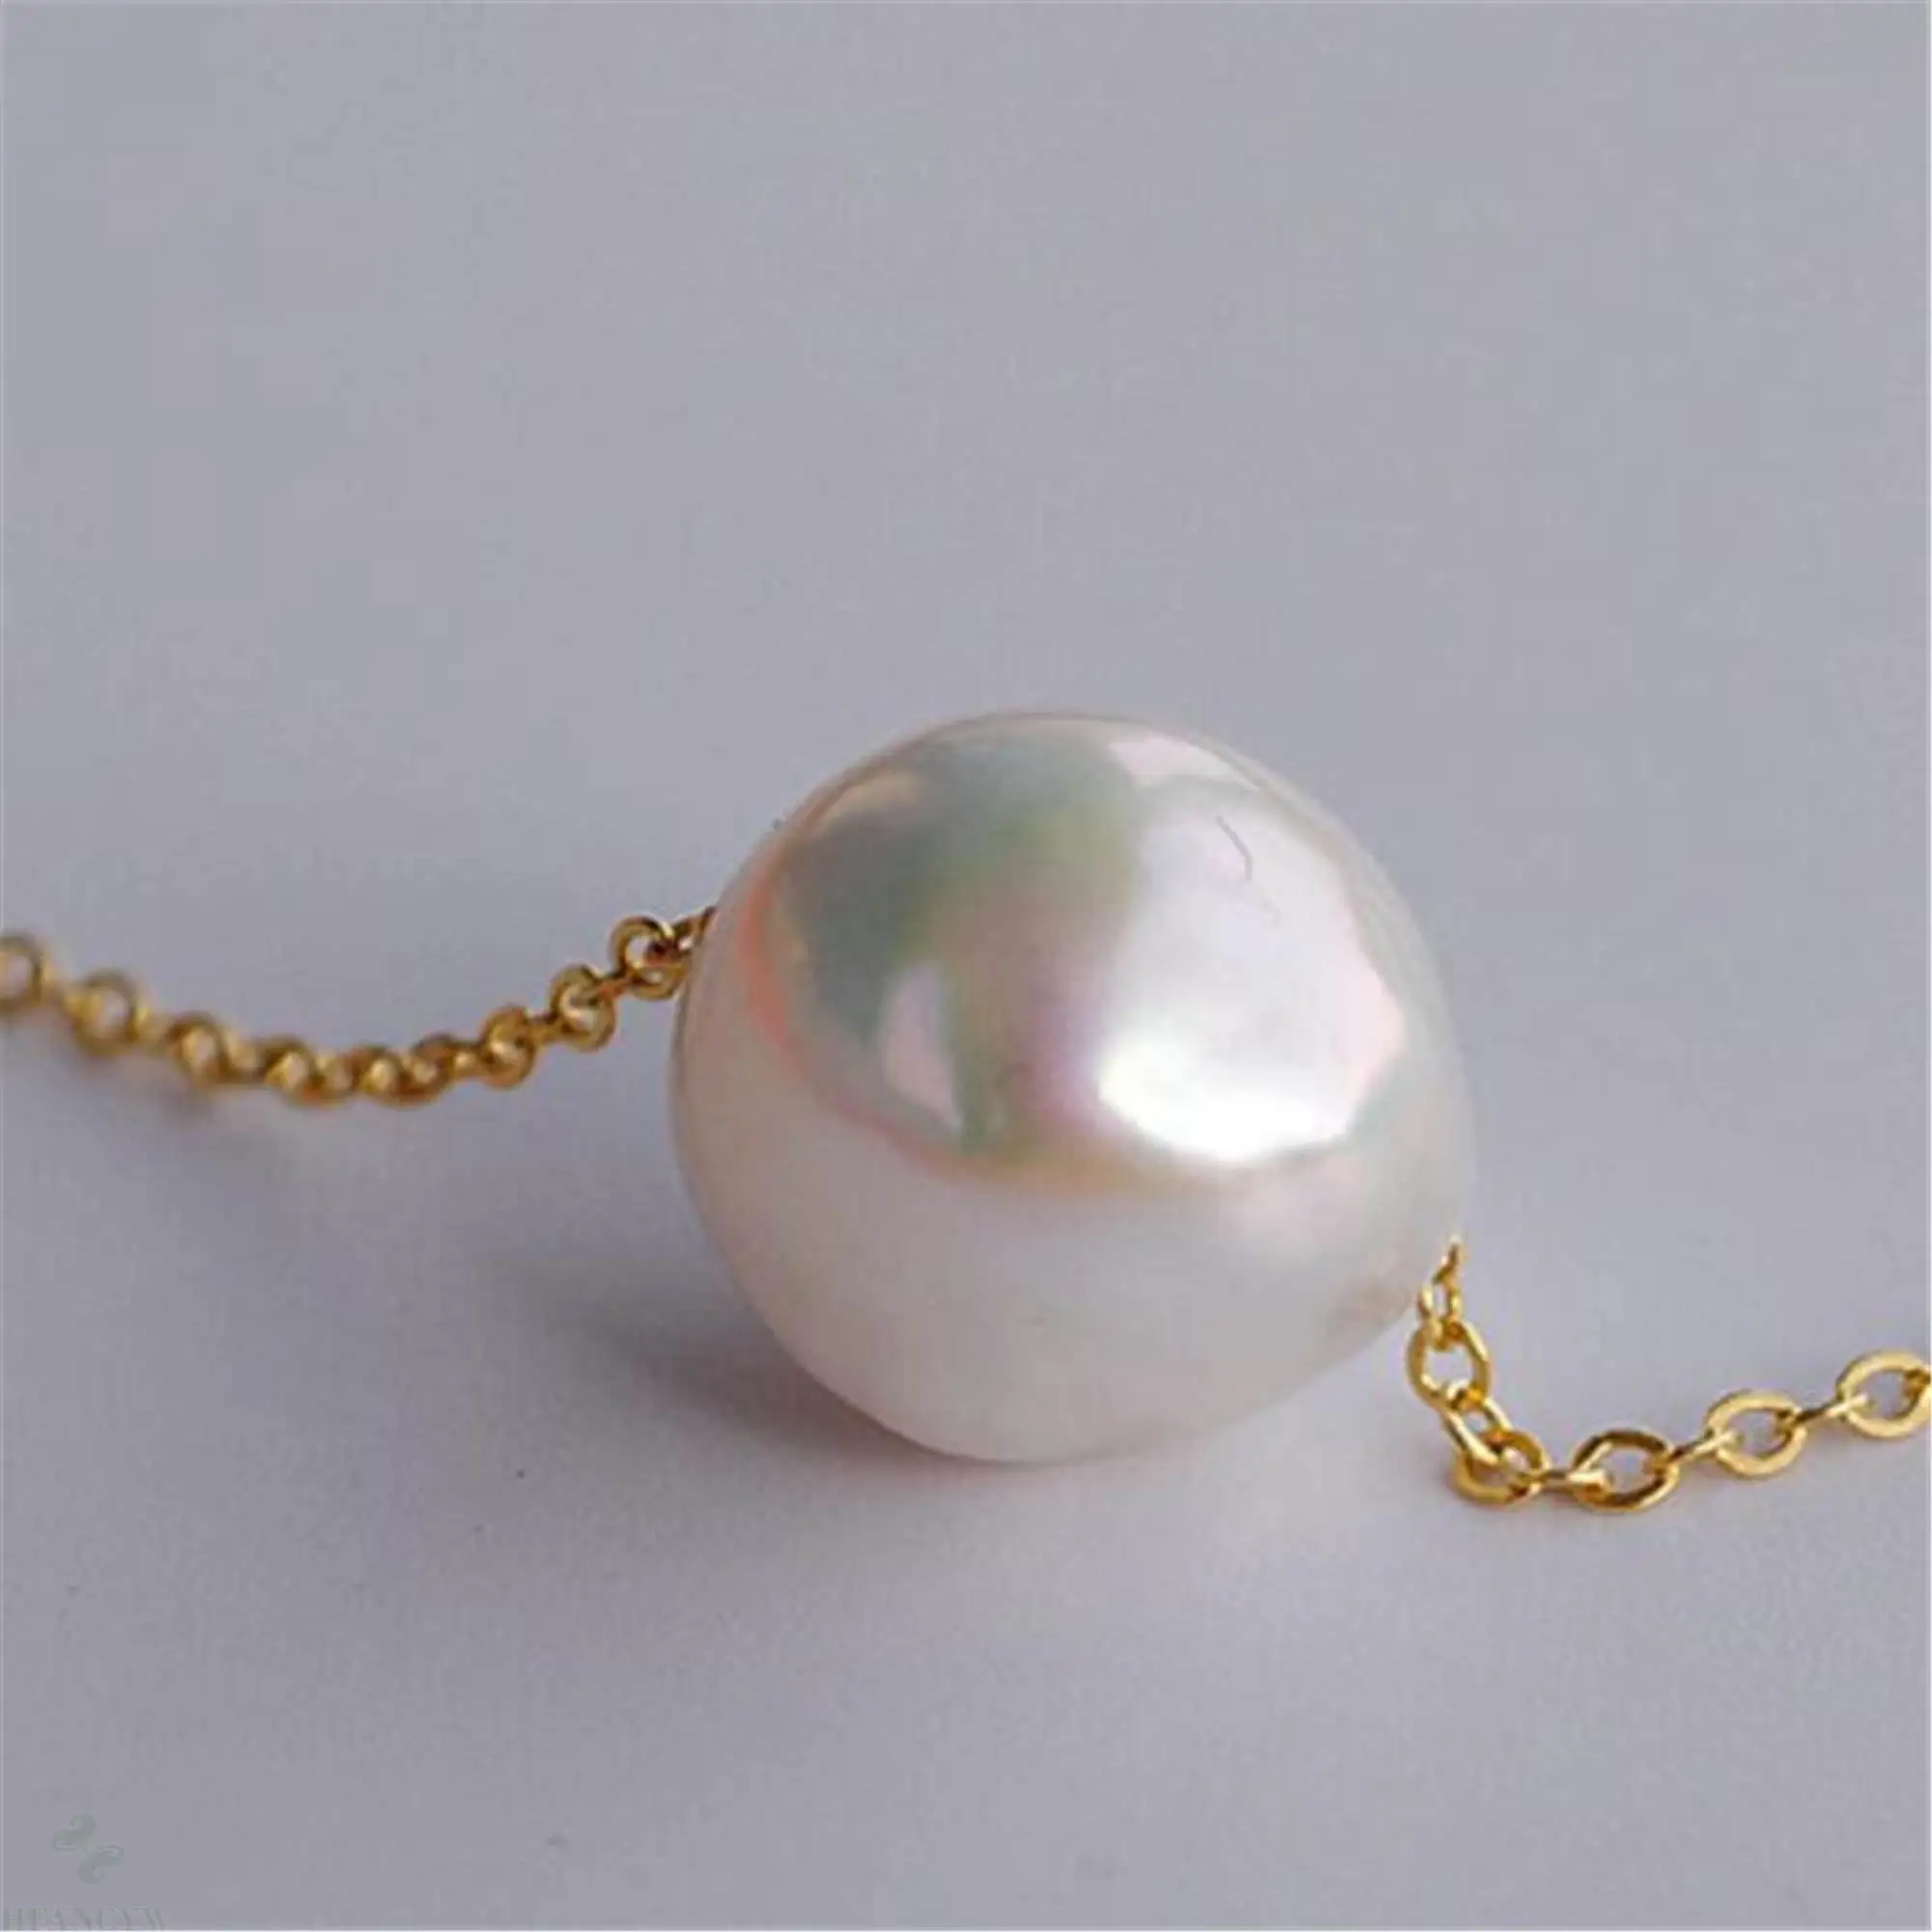 1pcs White Baroque Pearl Pendant Golden 18 inches Necklace Flawless Accessories Jewelry Women Gift Wedding Diy Classic